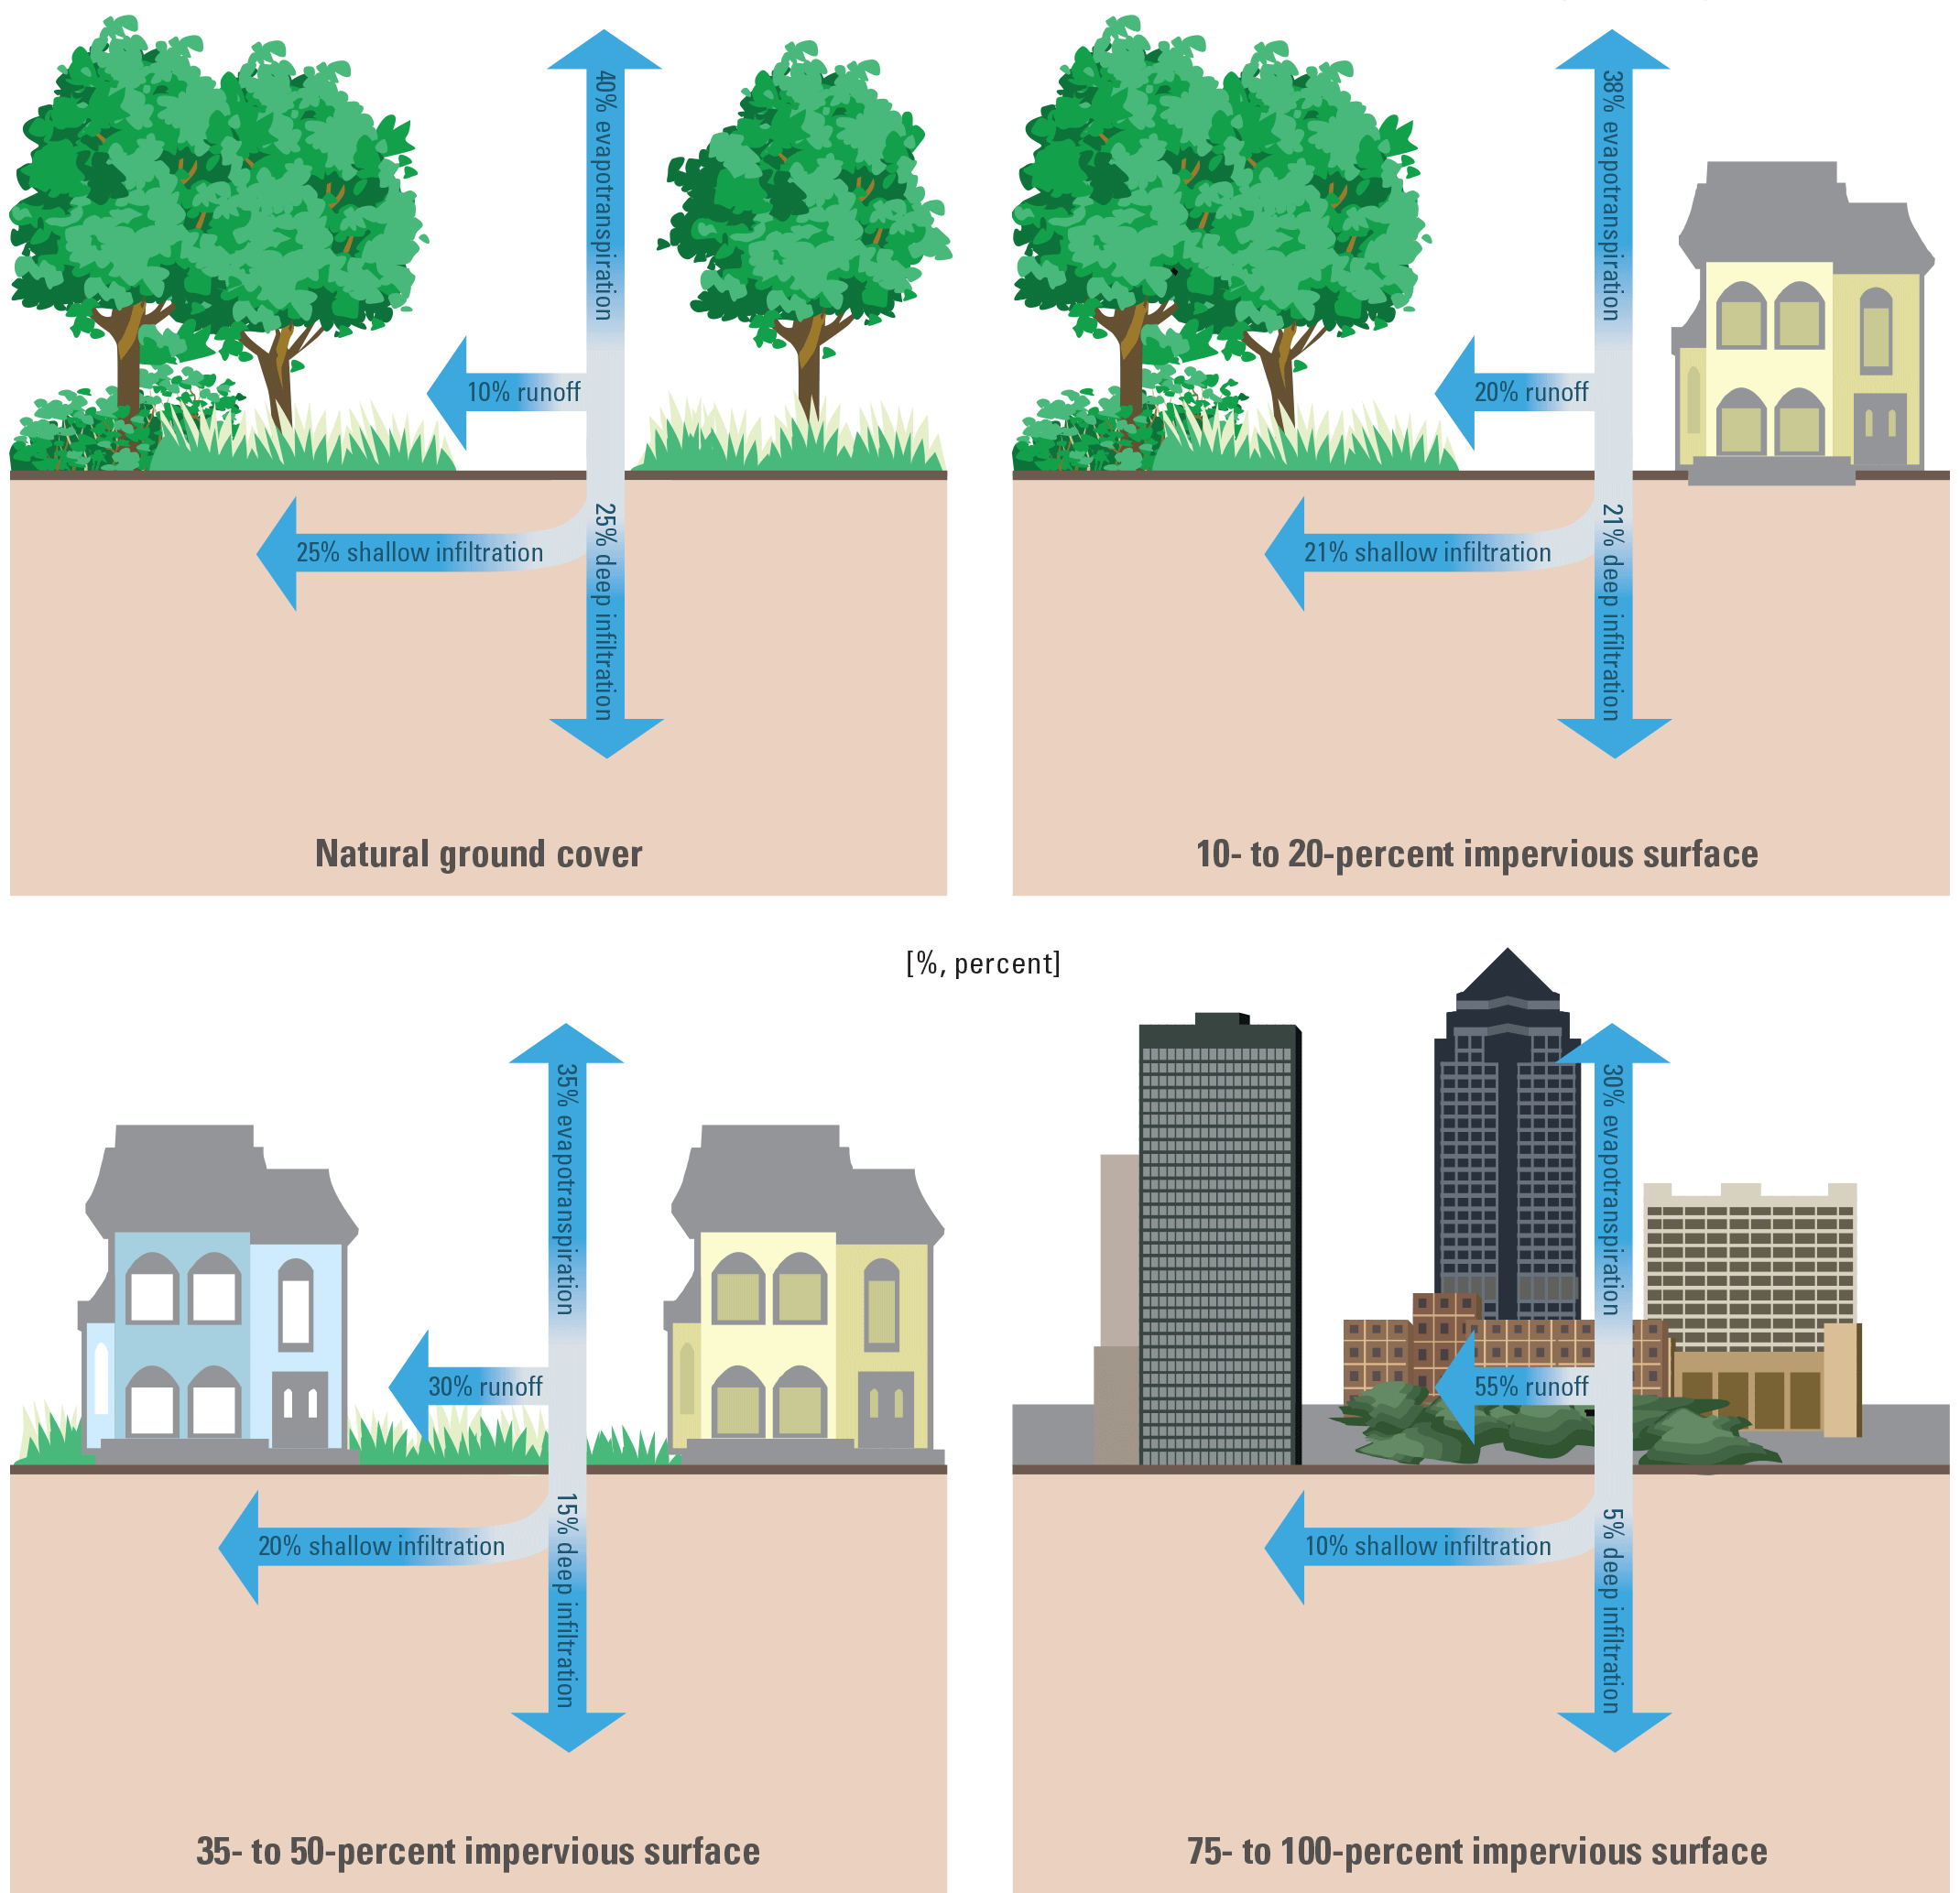 Changing from 75–100% to 10–20% impervious surfaces reduces runoff by 25% and increases
                     deep infiltration by 16%.